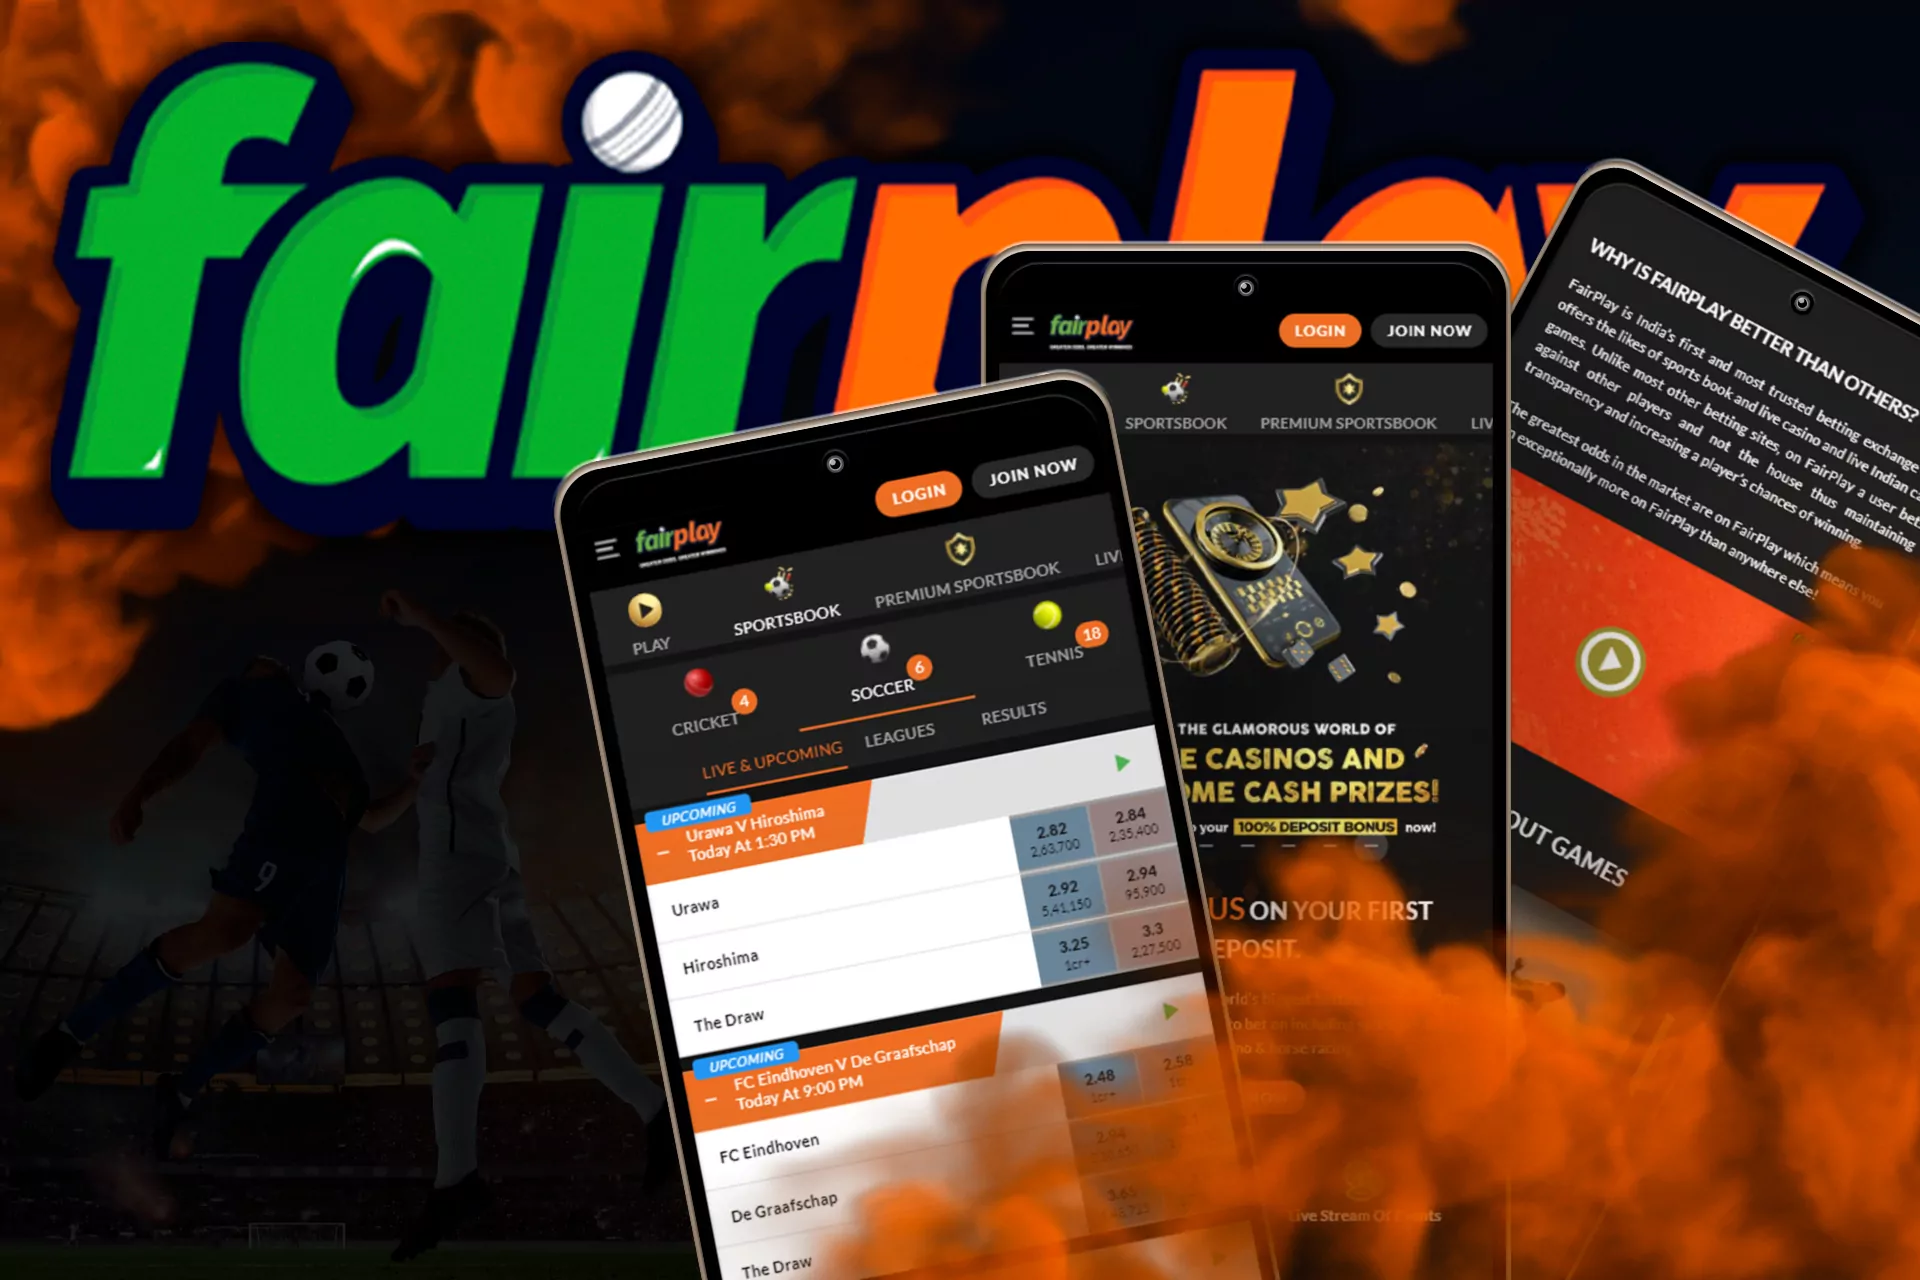 The Fairplay app can be used on most Android devices.